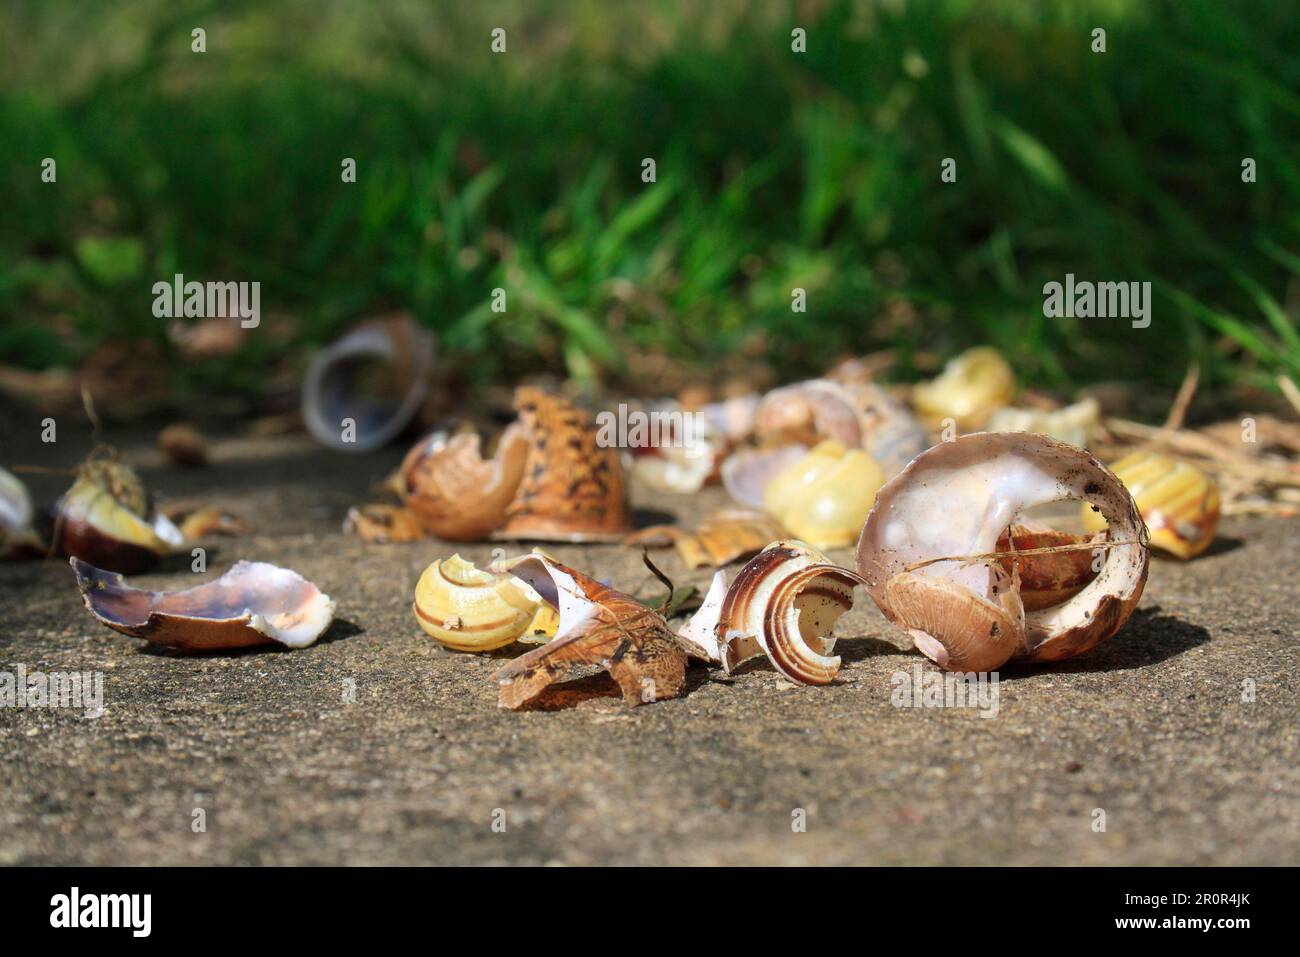 Song thrush (Turdus philomelos) Anvil with remains of snail shells, on concrete patio in garden, Suffolk, England, United Kingdom Stock Photo